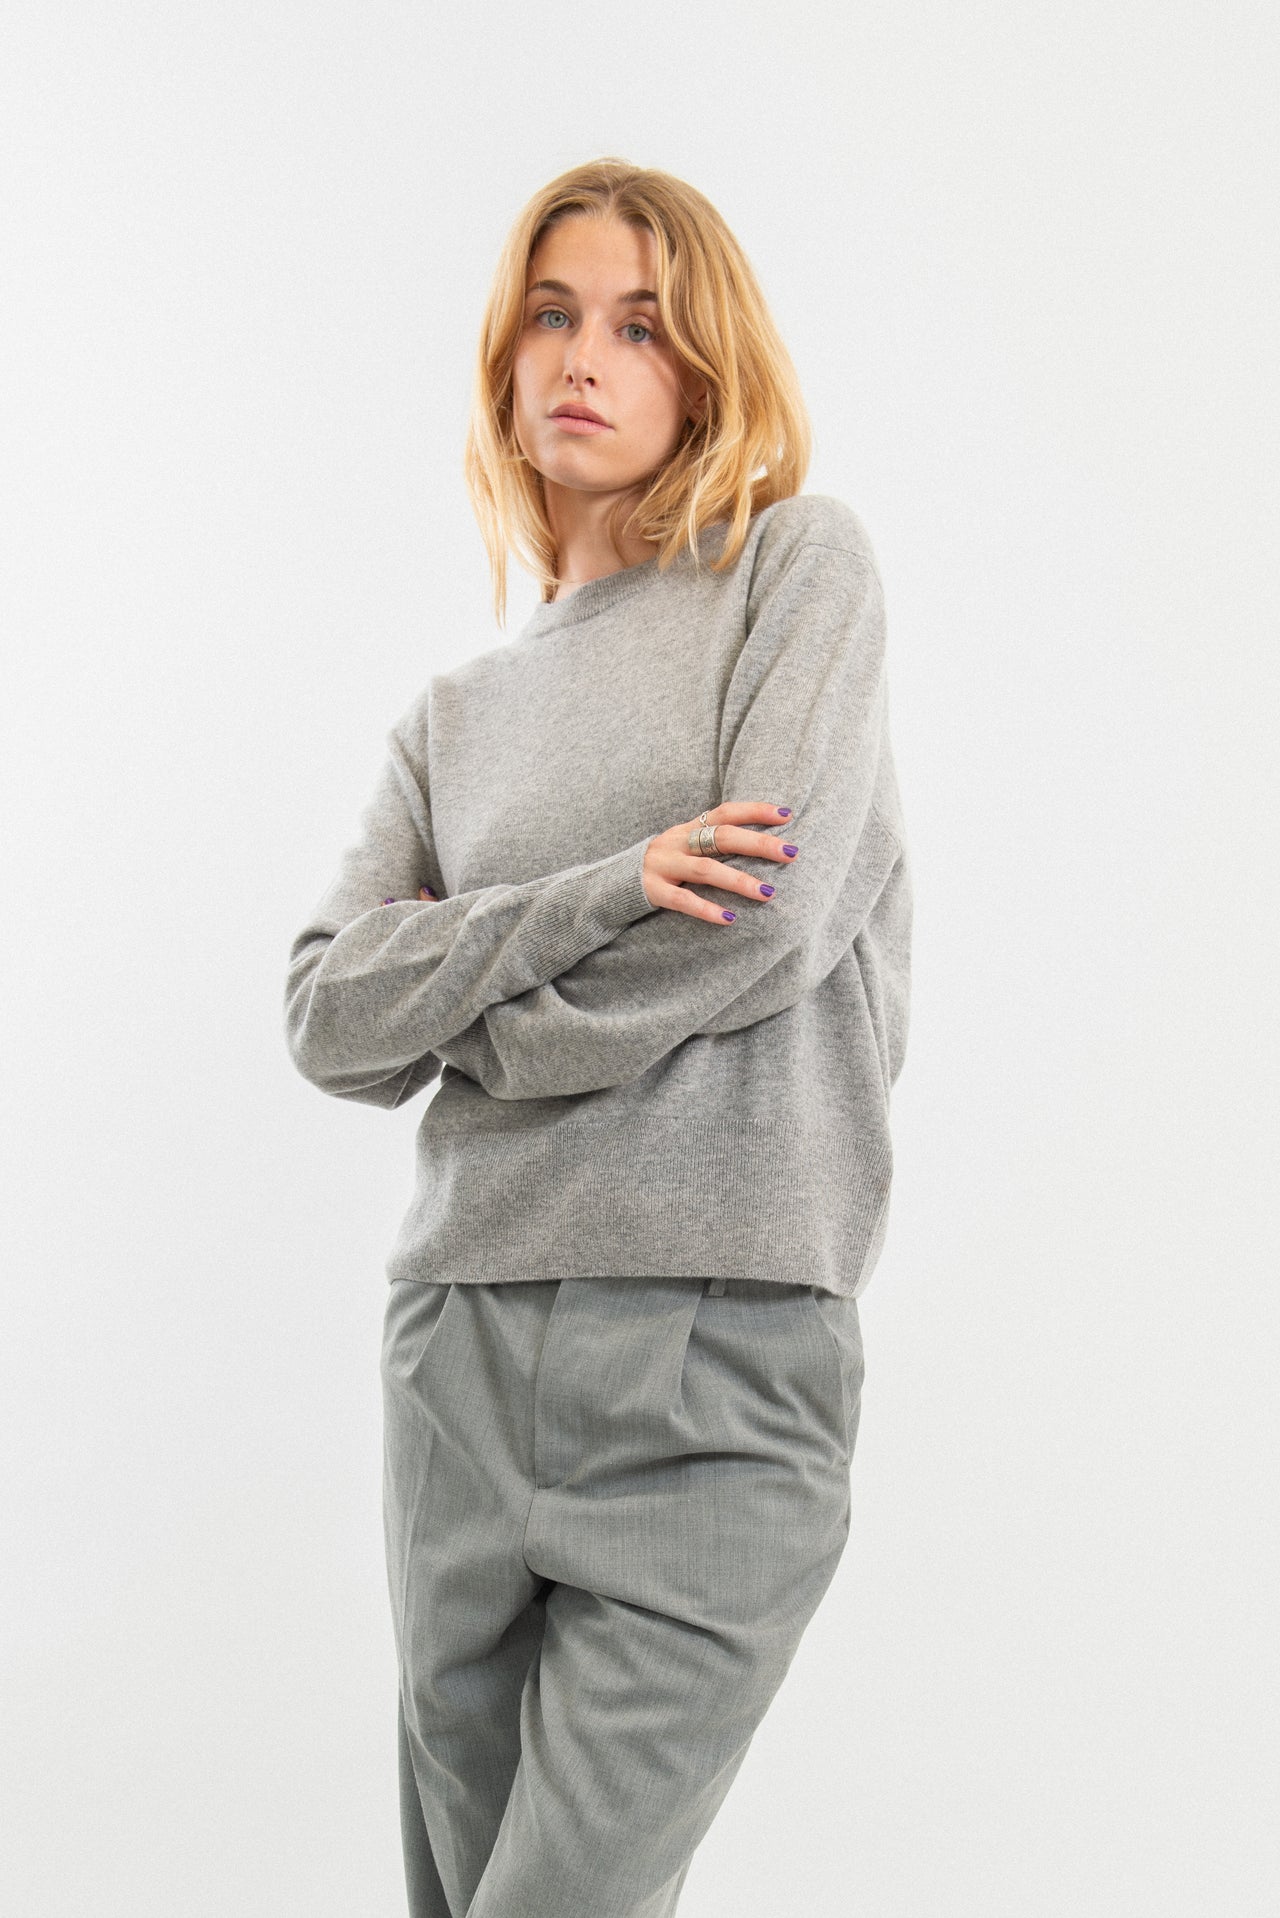 100% Cashmere round-neck sweater in a slightly fitted shape